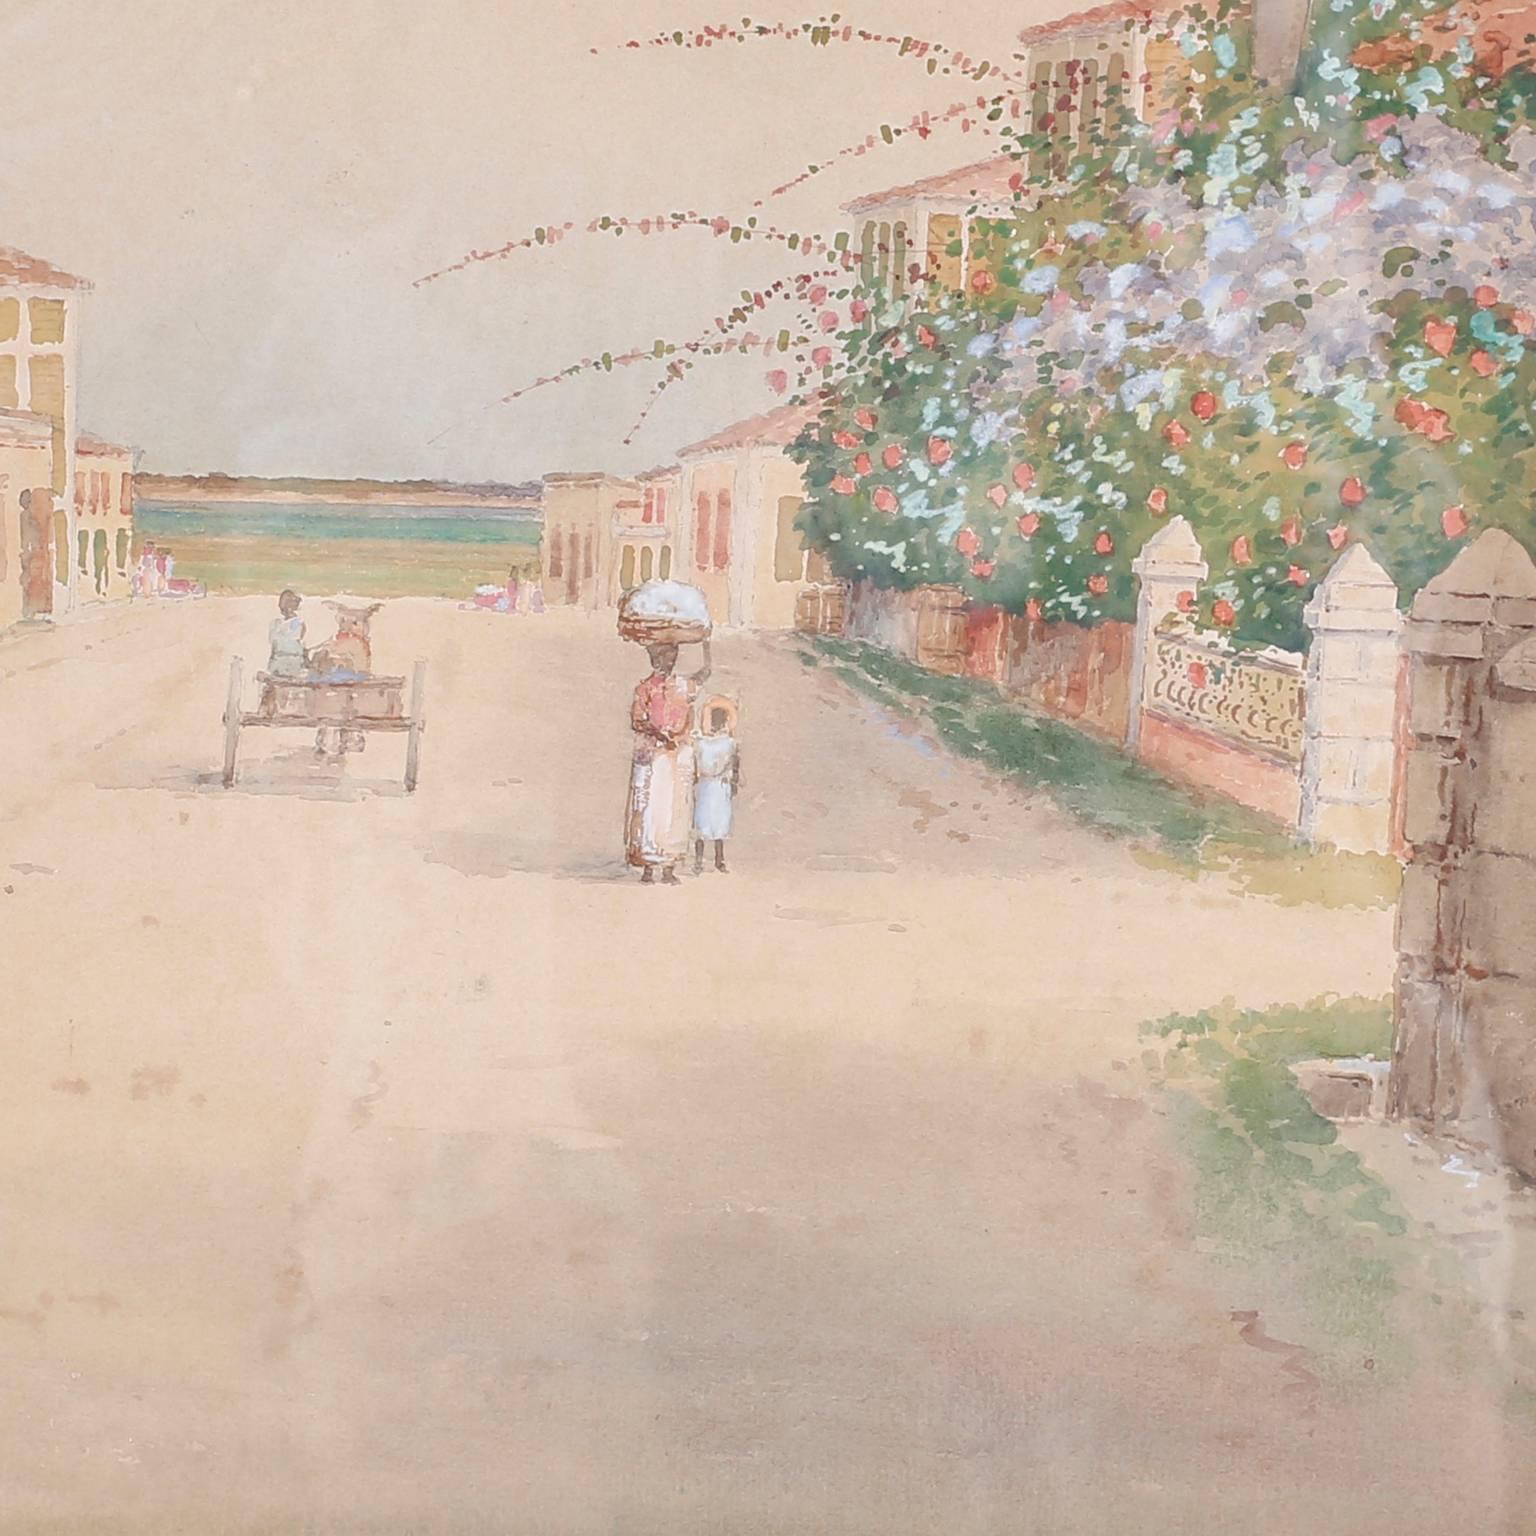 British Colonial Watercolor of a Tropical Street Scene